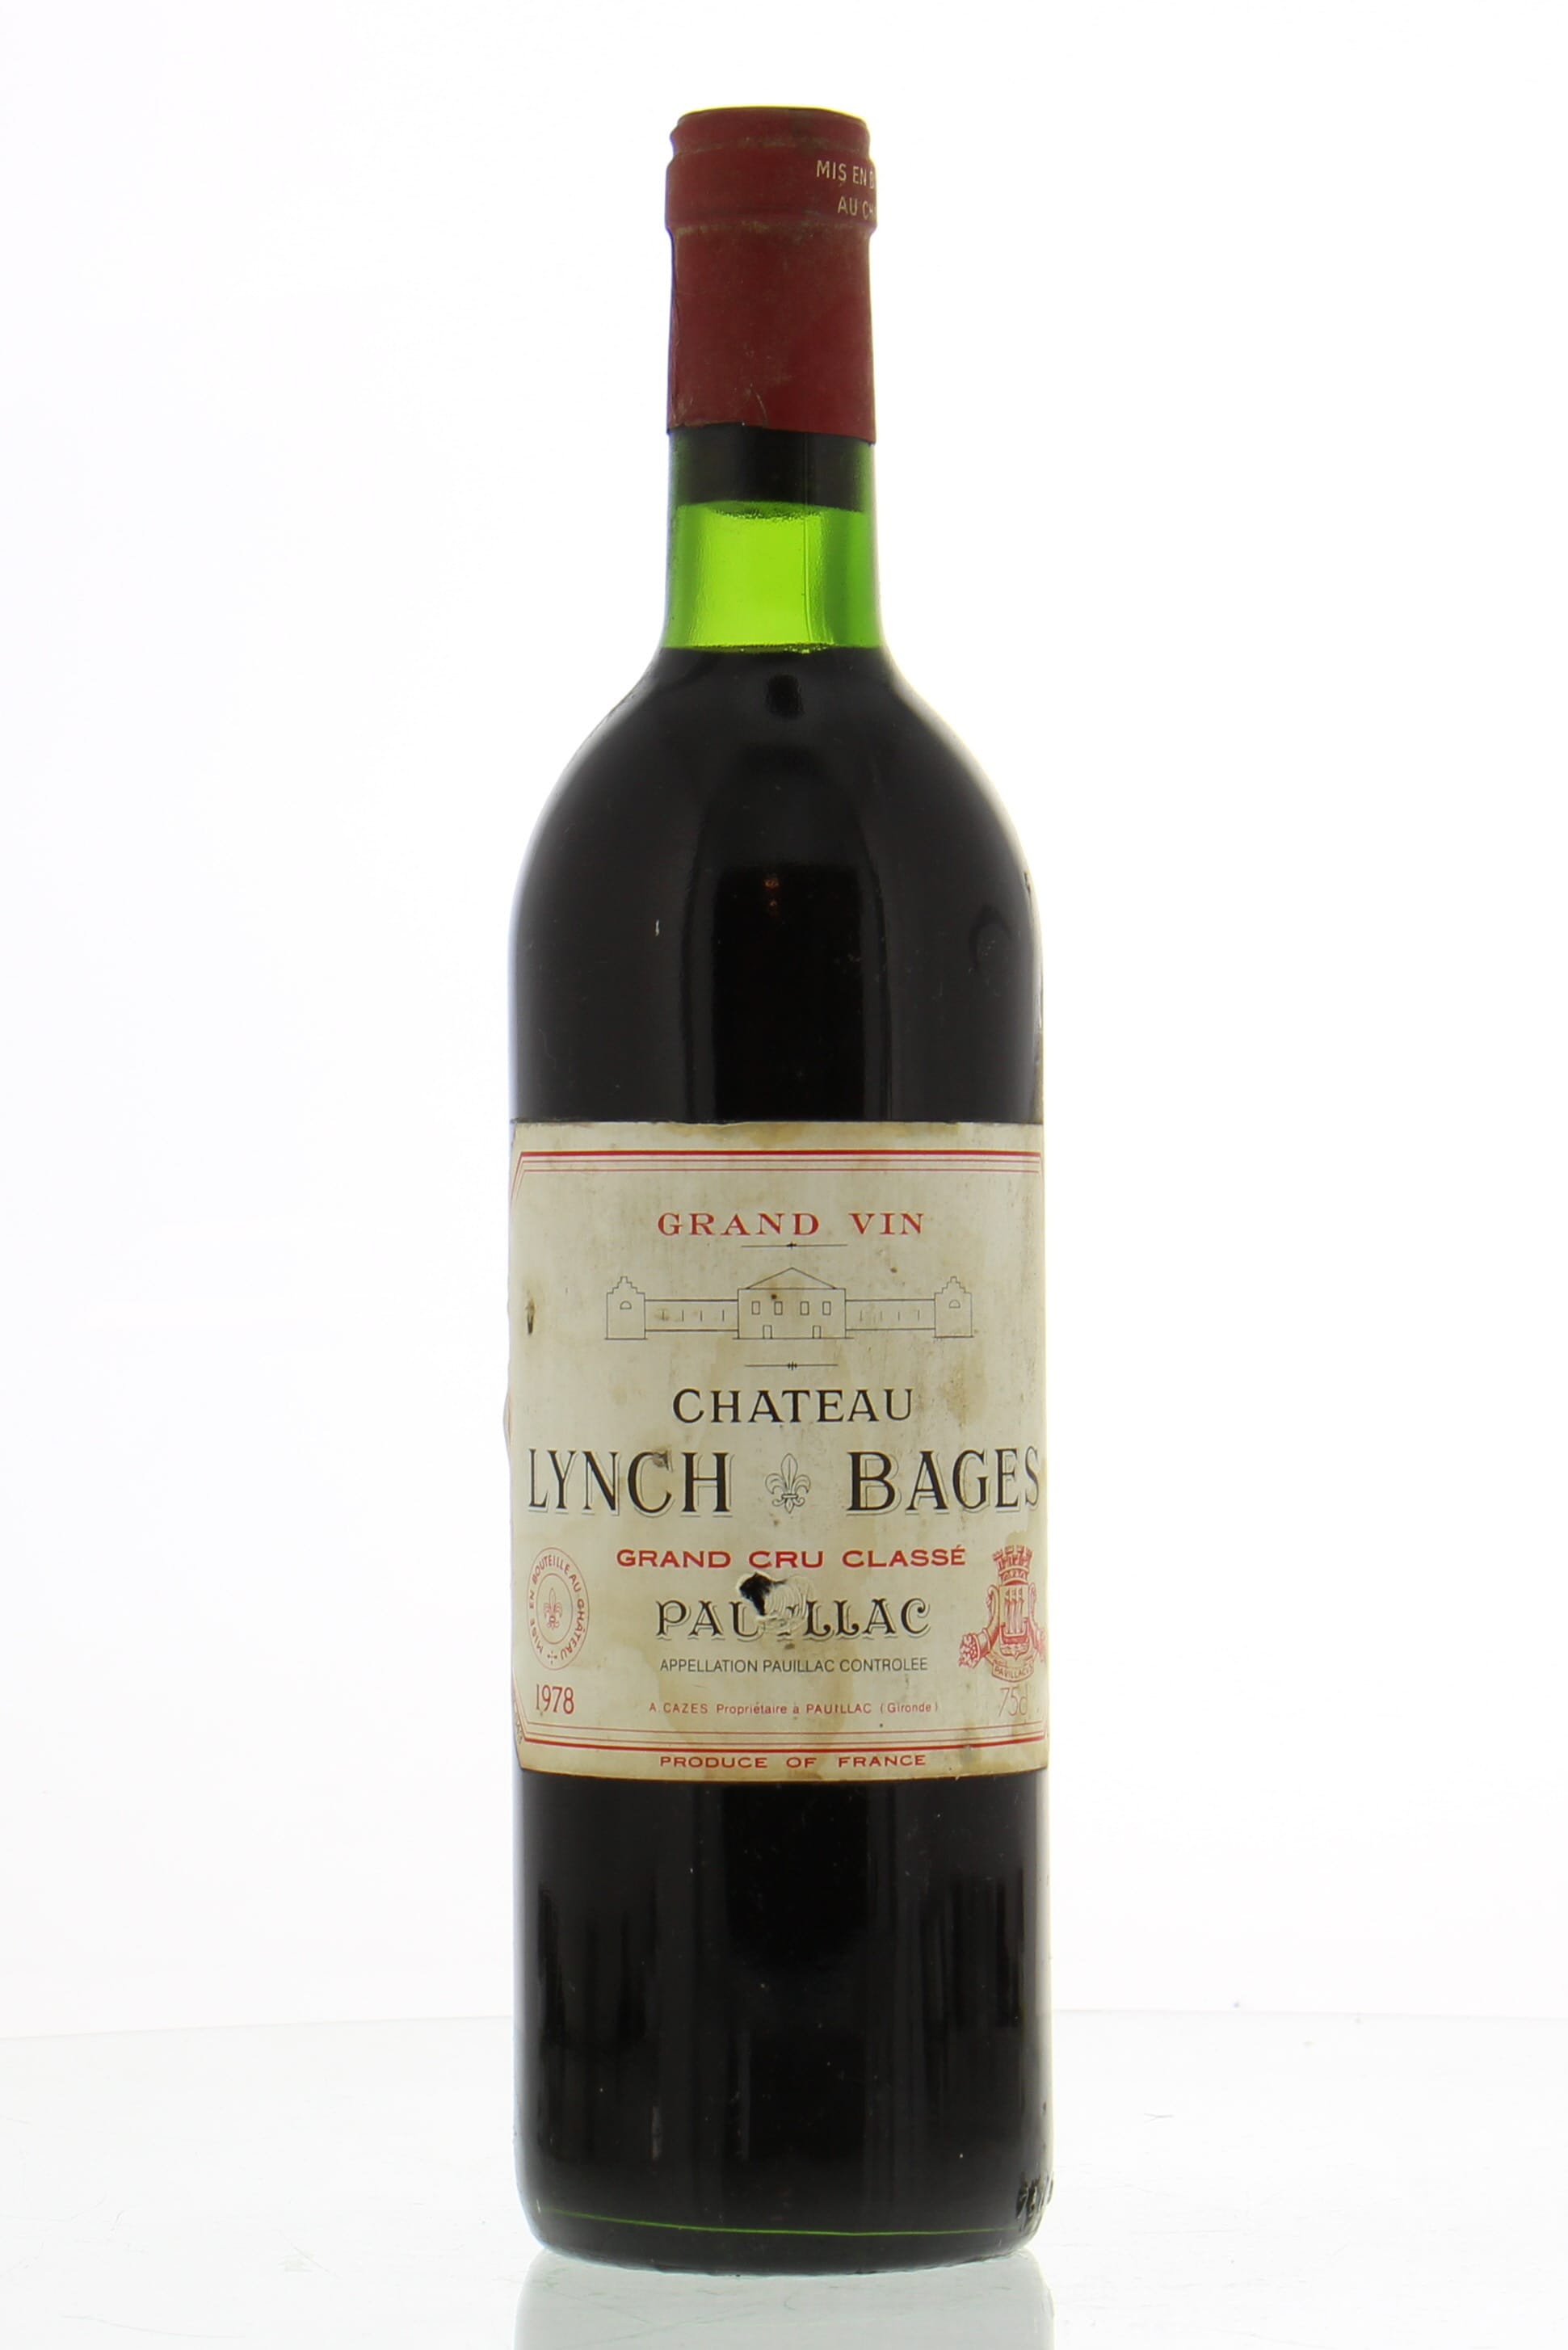 Chateau Lynch Bages - Chateau Lynch Bages 1978